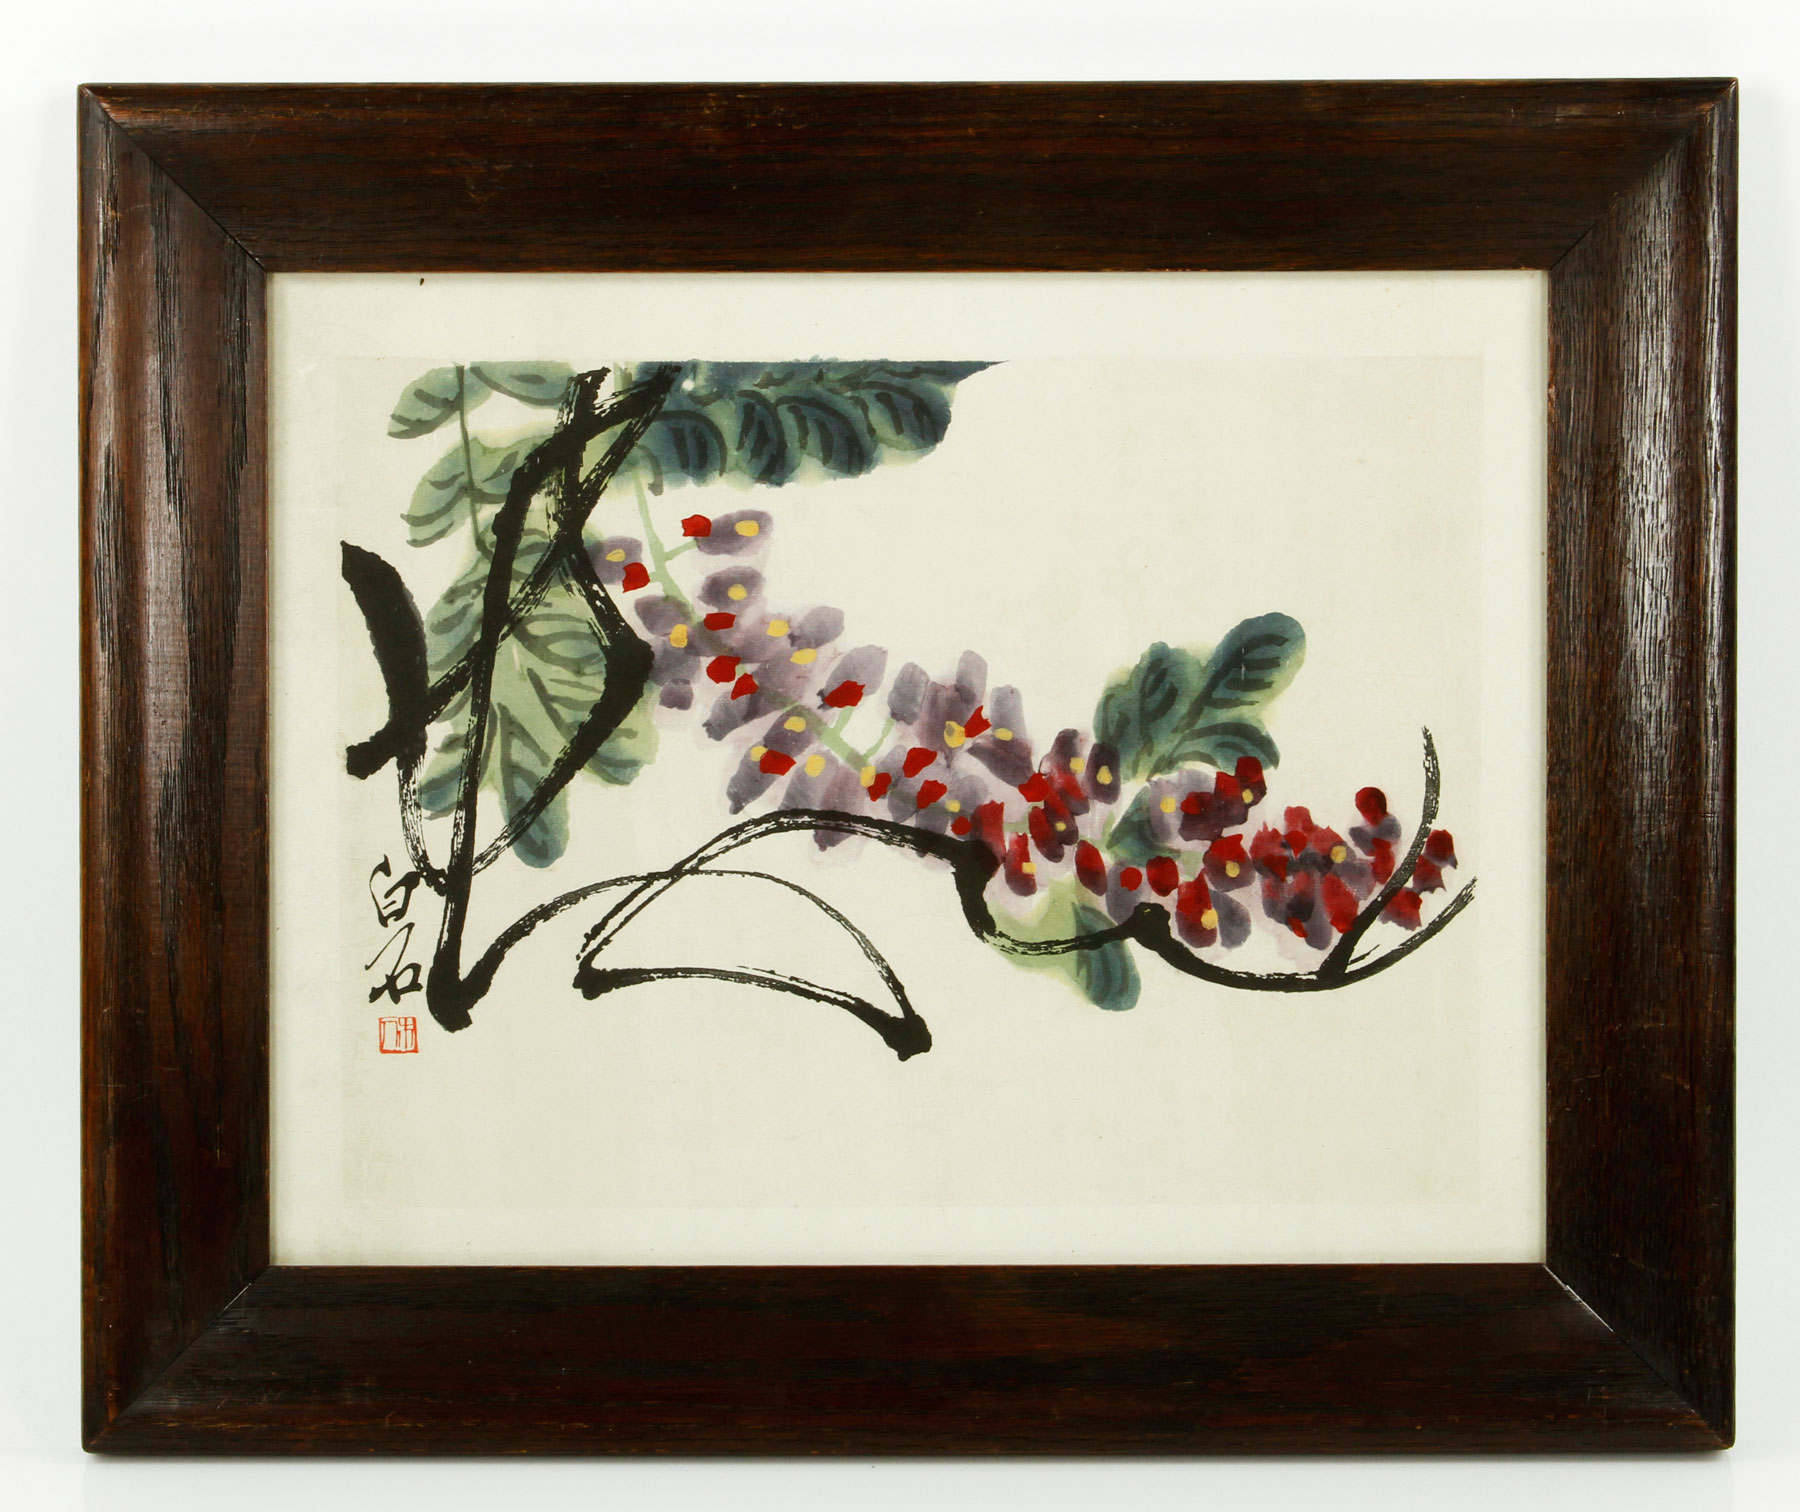 Painting, China, 20th century, of a wisteria branch, watercolor on paper, signed Qi Baishi, 10 3/8" h x 13 3/8" w, framed 14 3/8" h x 17 1/2" w.